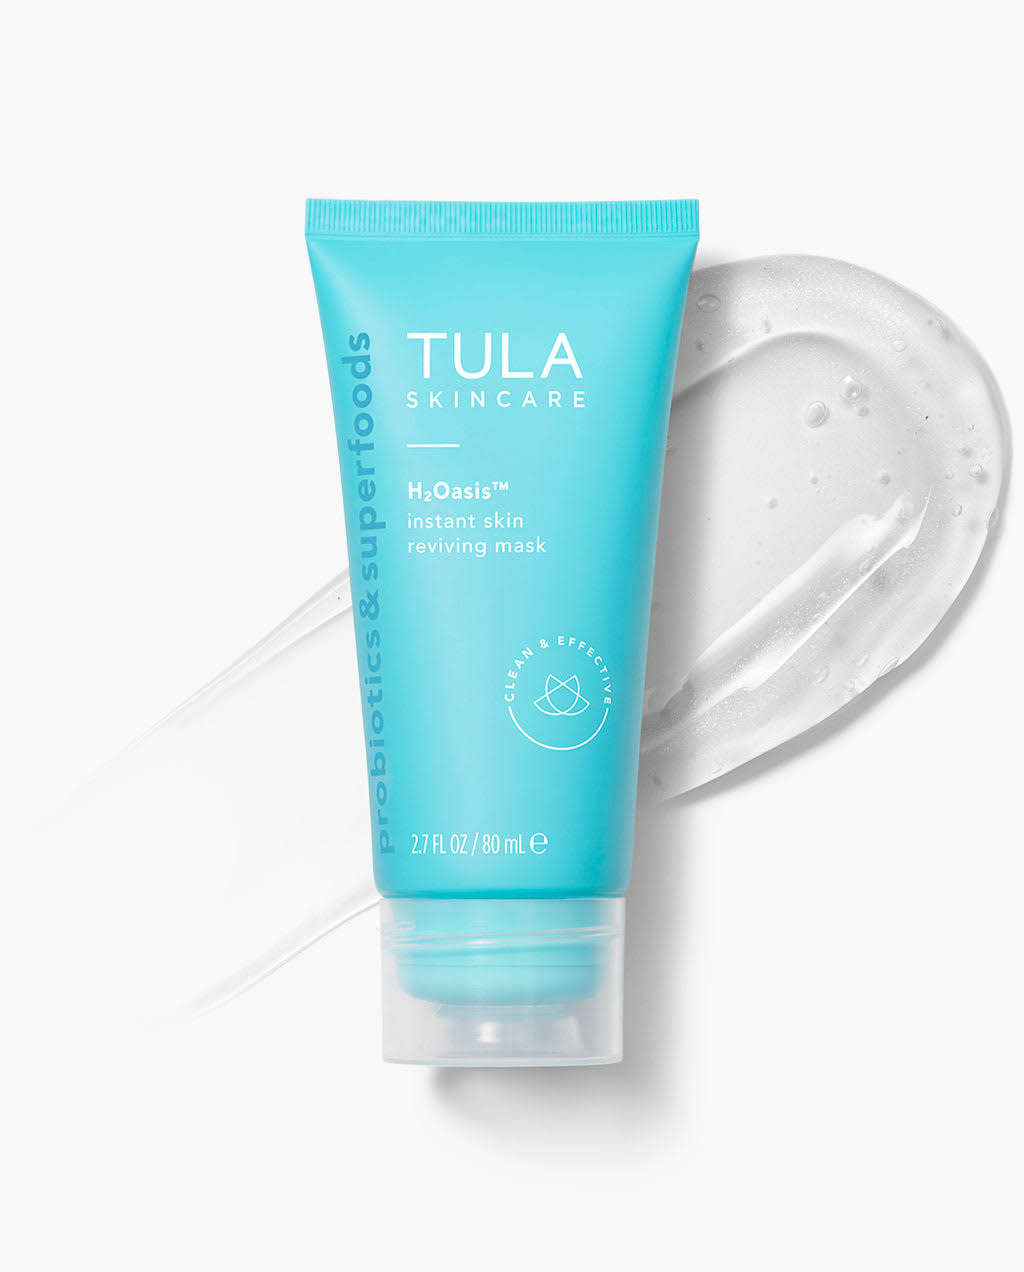 P&G Beauty acquires skincare brand Tula